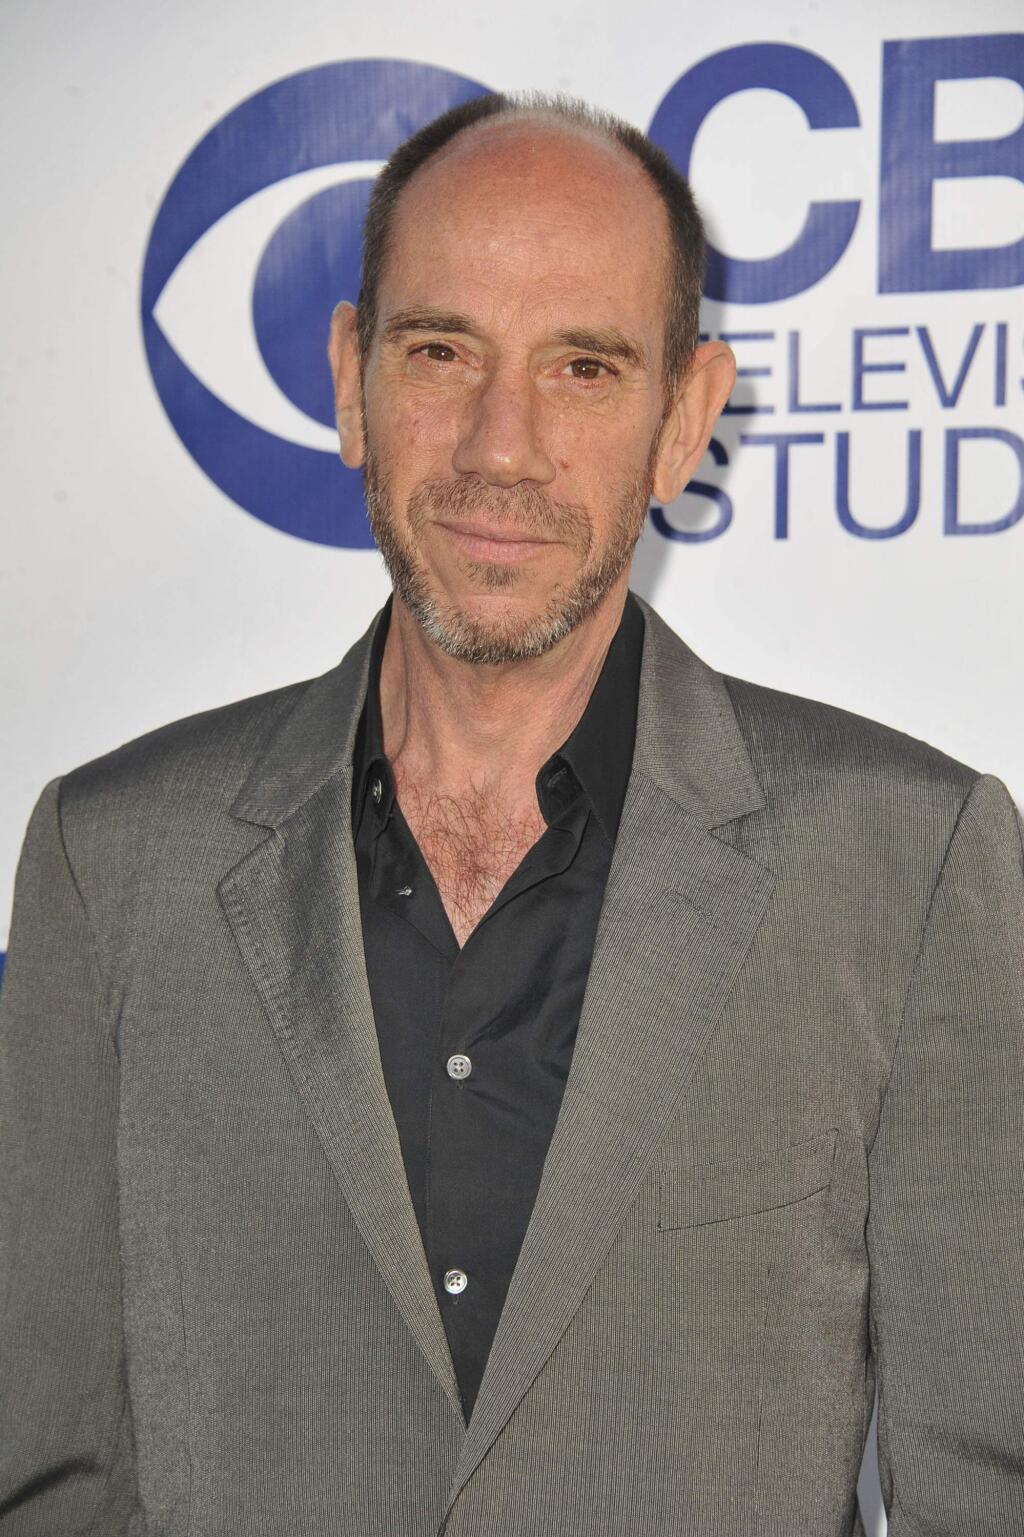 FILE - This May 19, 2014 file photo shows actor Miguel Ferrer at CBS Television Studios Summer Soiree in Los Angeles. Ferrer, who brought stern authority to his featured role on CBS' hit drama “NCIS: Los Angeles” and, before that, to “Crossing Jordan,” died Thursday, Jan. 19, 2017, of cancer at his Los Angeles home. He was 61. (Photo by Katy Winn//Invision/AP, File)